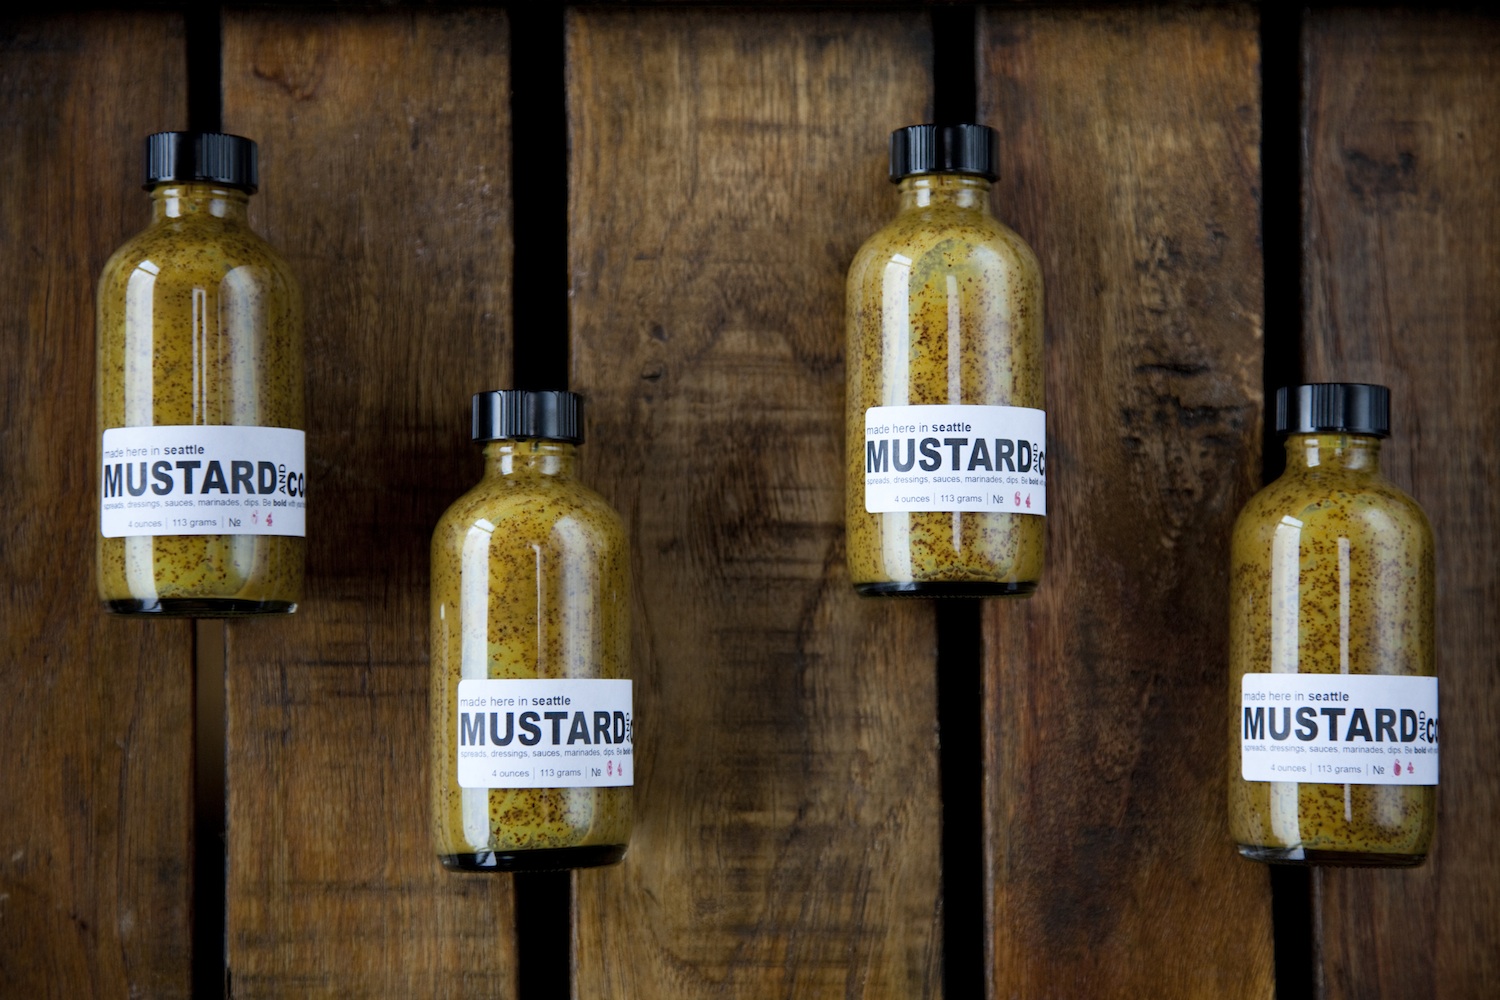 Mustard and Co.